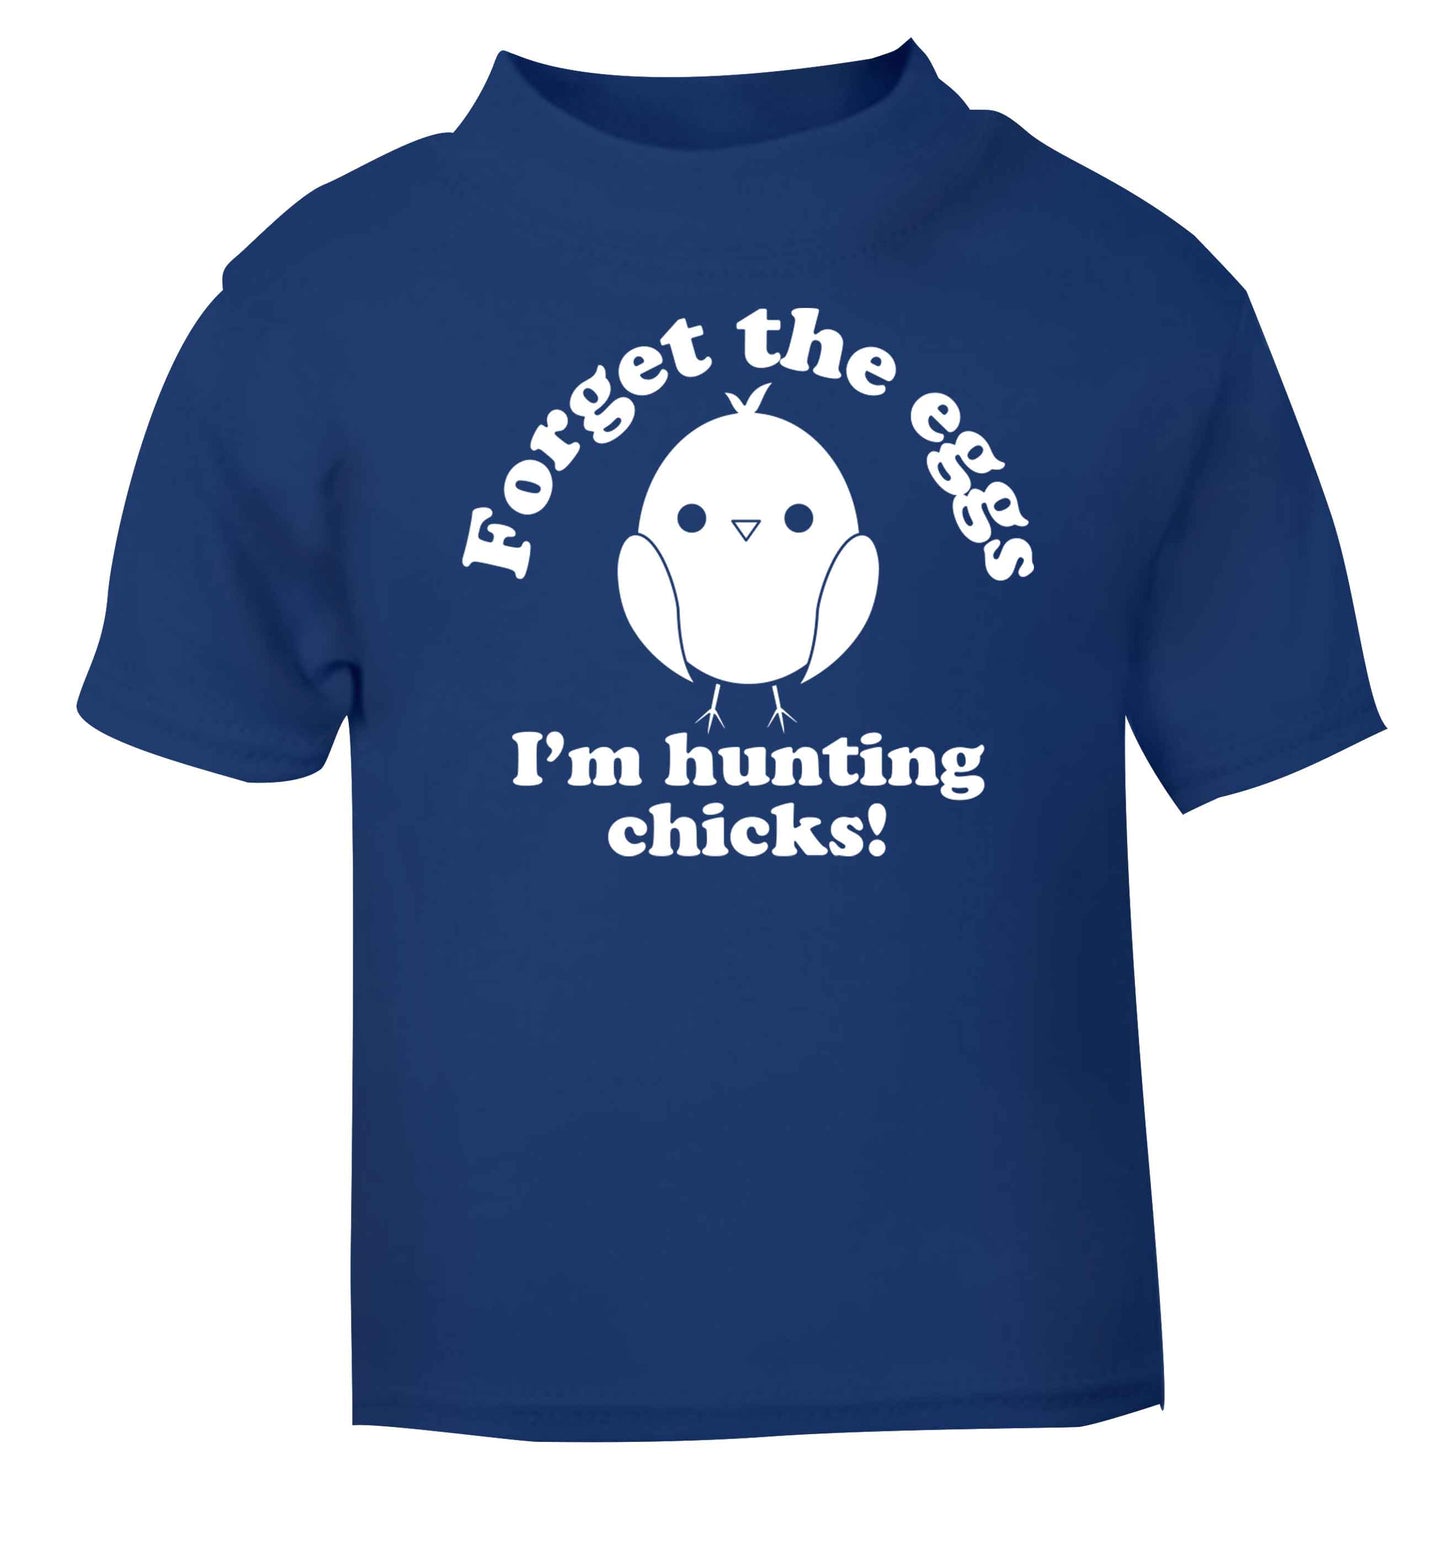 Forget the eggs I'm hunting chicks! blue baby toddler Tshirt 2 Years